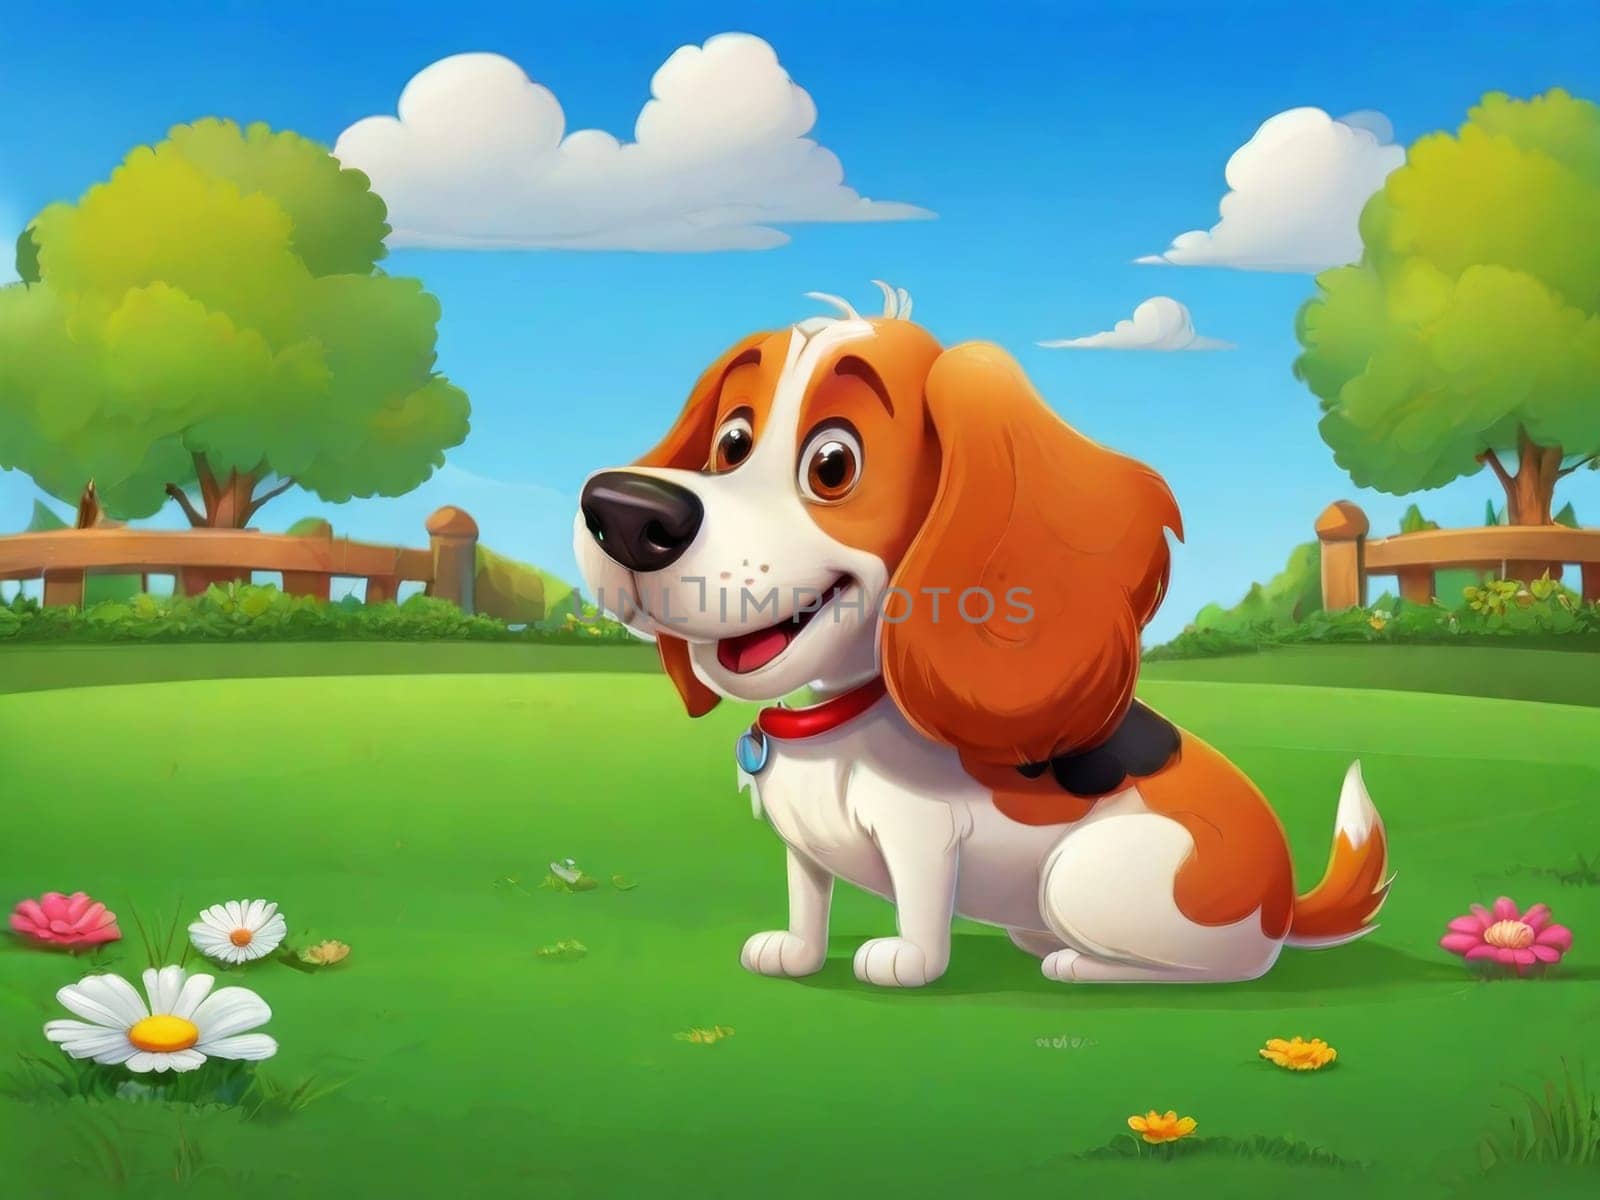 Cute cartoon dog sitting on the lawn in the garden by Ekaterina34